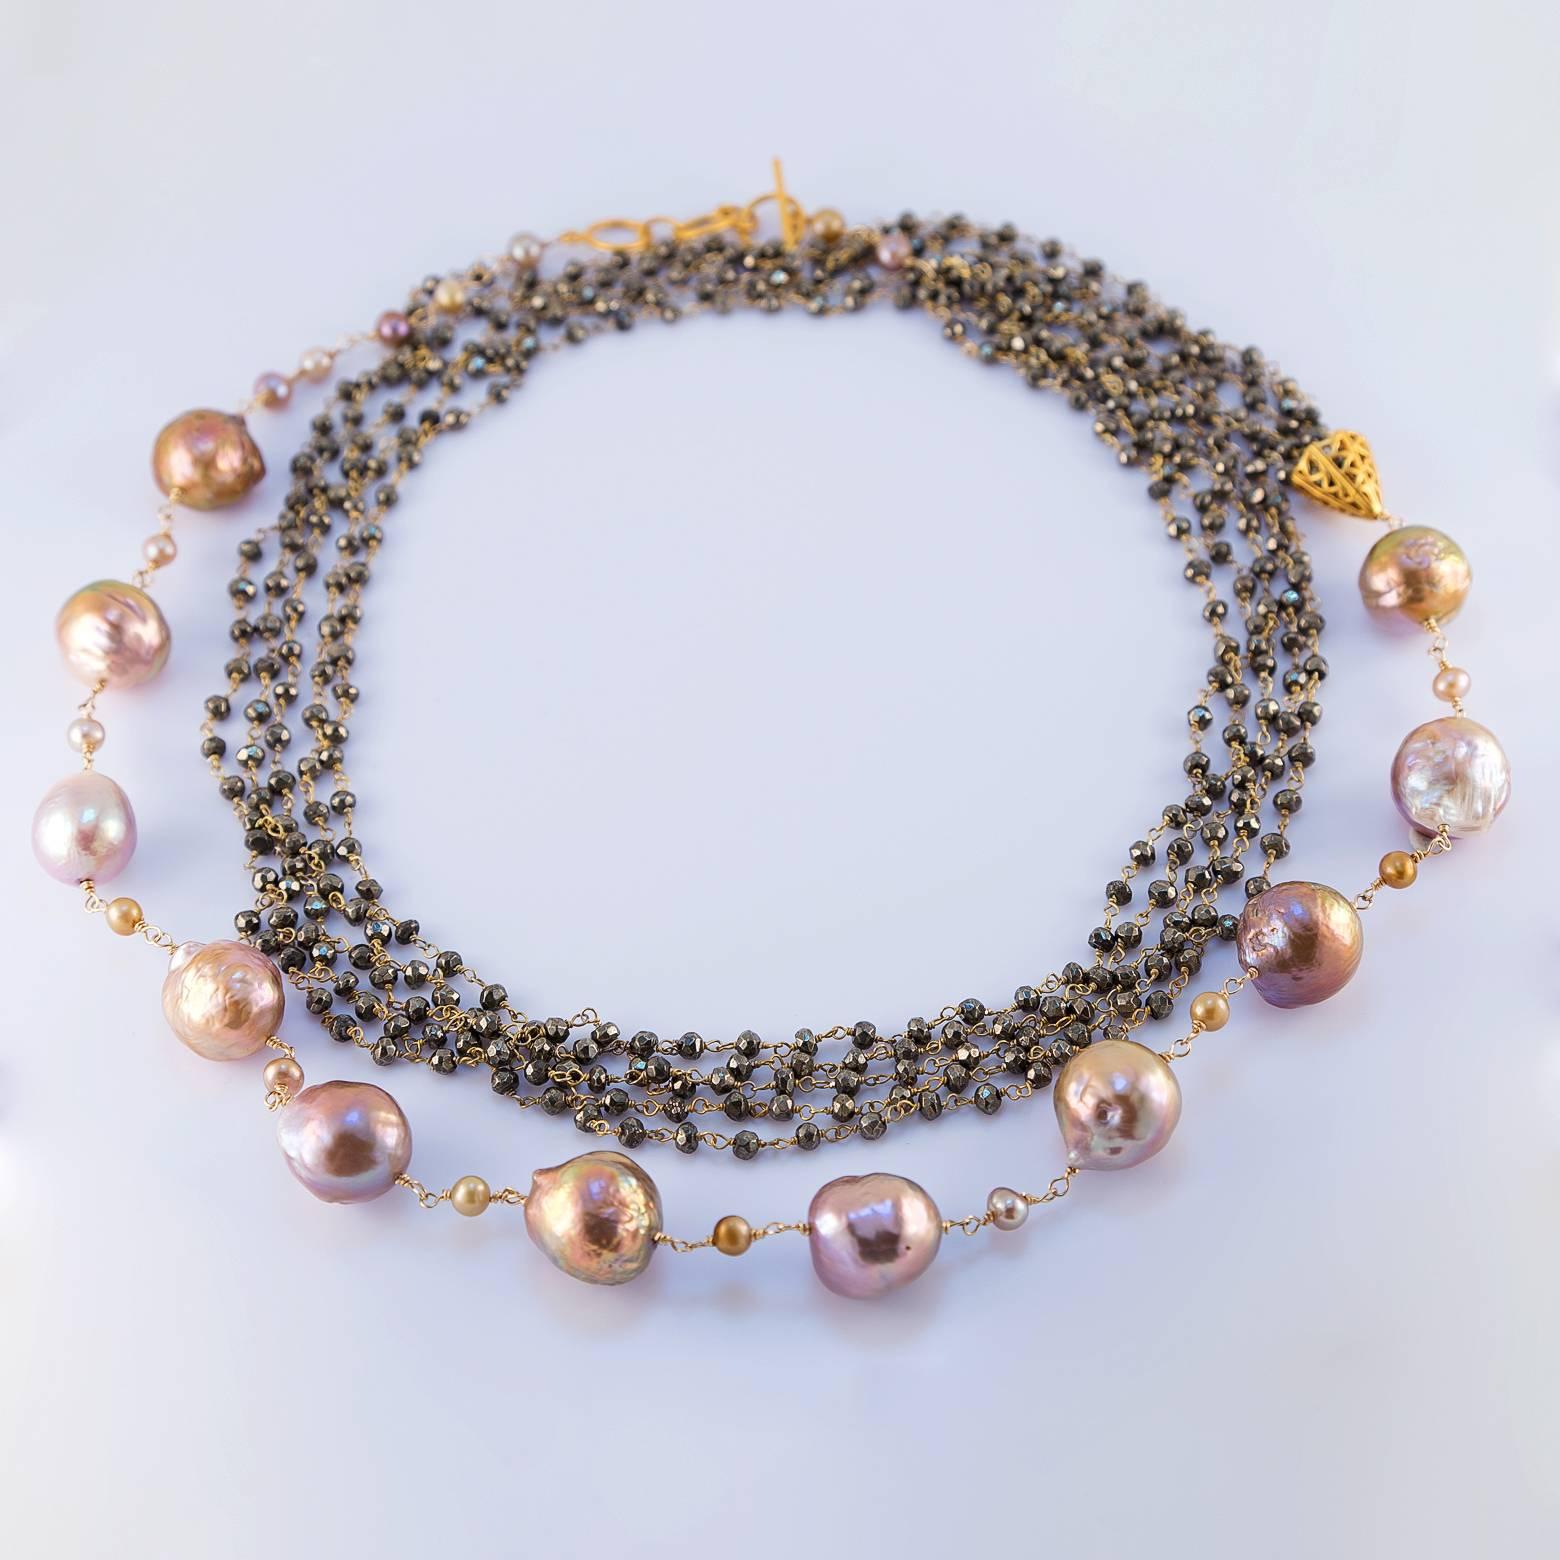 Fresh Water Pearls and Hematite Beads! This yellow gold plated matinee length necklace comes with 5 strands of hematite beads and 16 large fresh water pearls. The 40.5 inch length allows so many different ways to wear this gorgeous necklace. It's